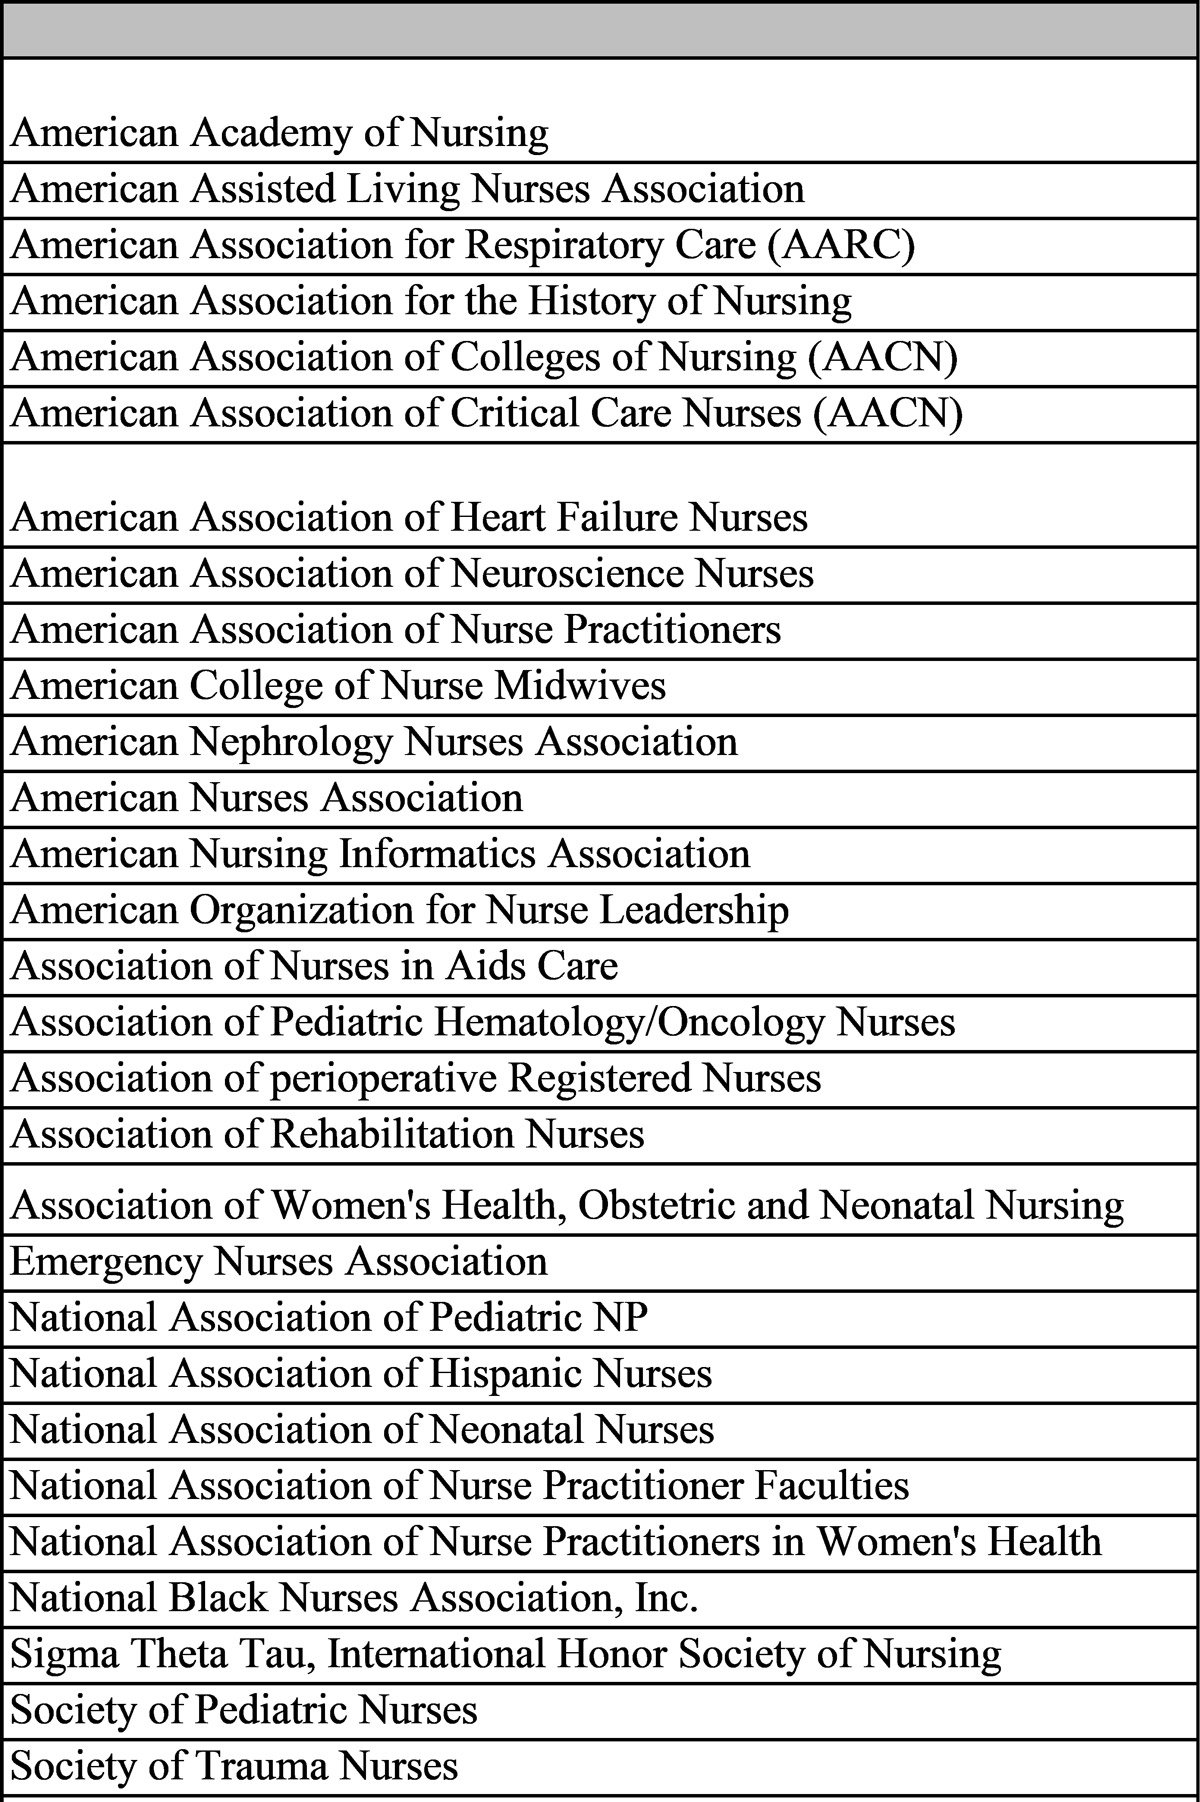 Diversity, Equity, & Inclusion Policies of National Nursing Organizations